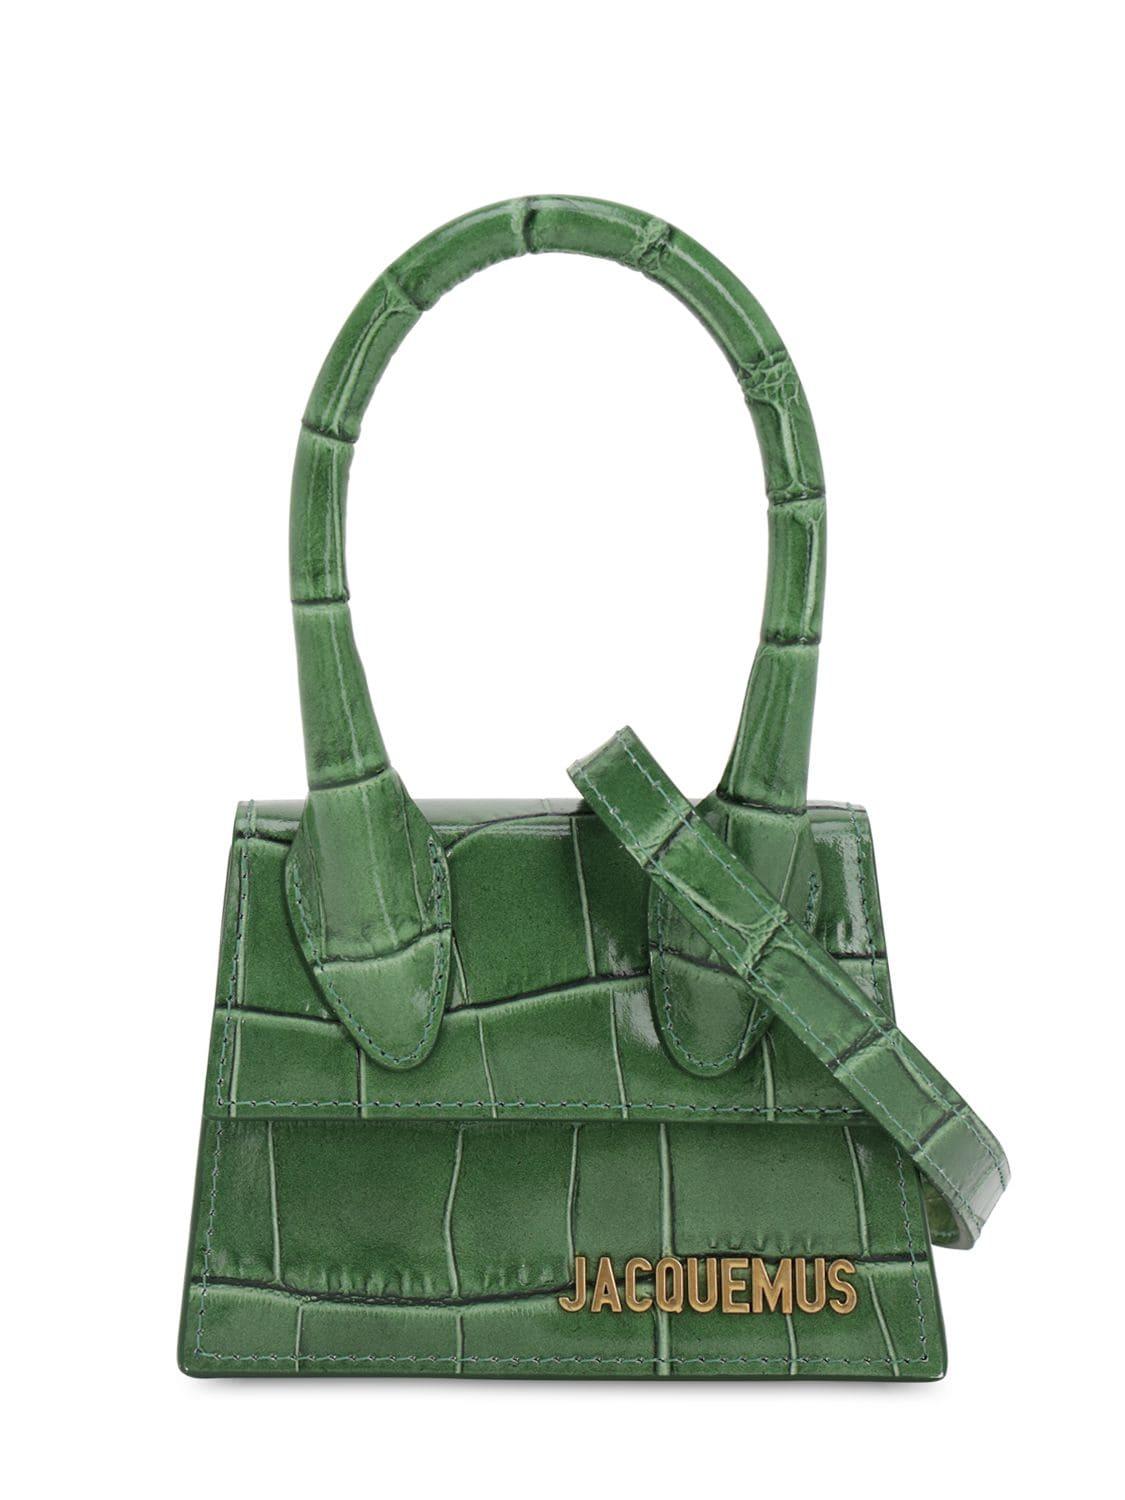 Jacquemus Le Chiquito Croc Print Leather Bag in Green | Lyst UK